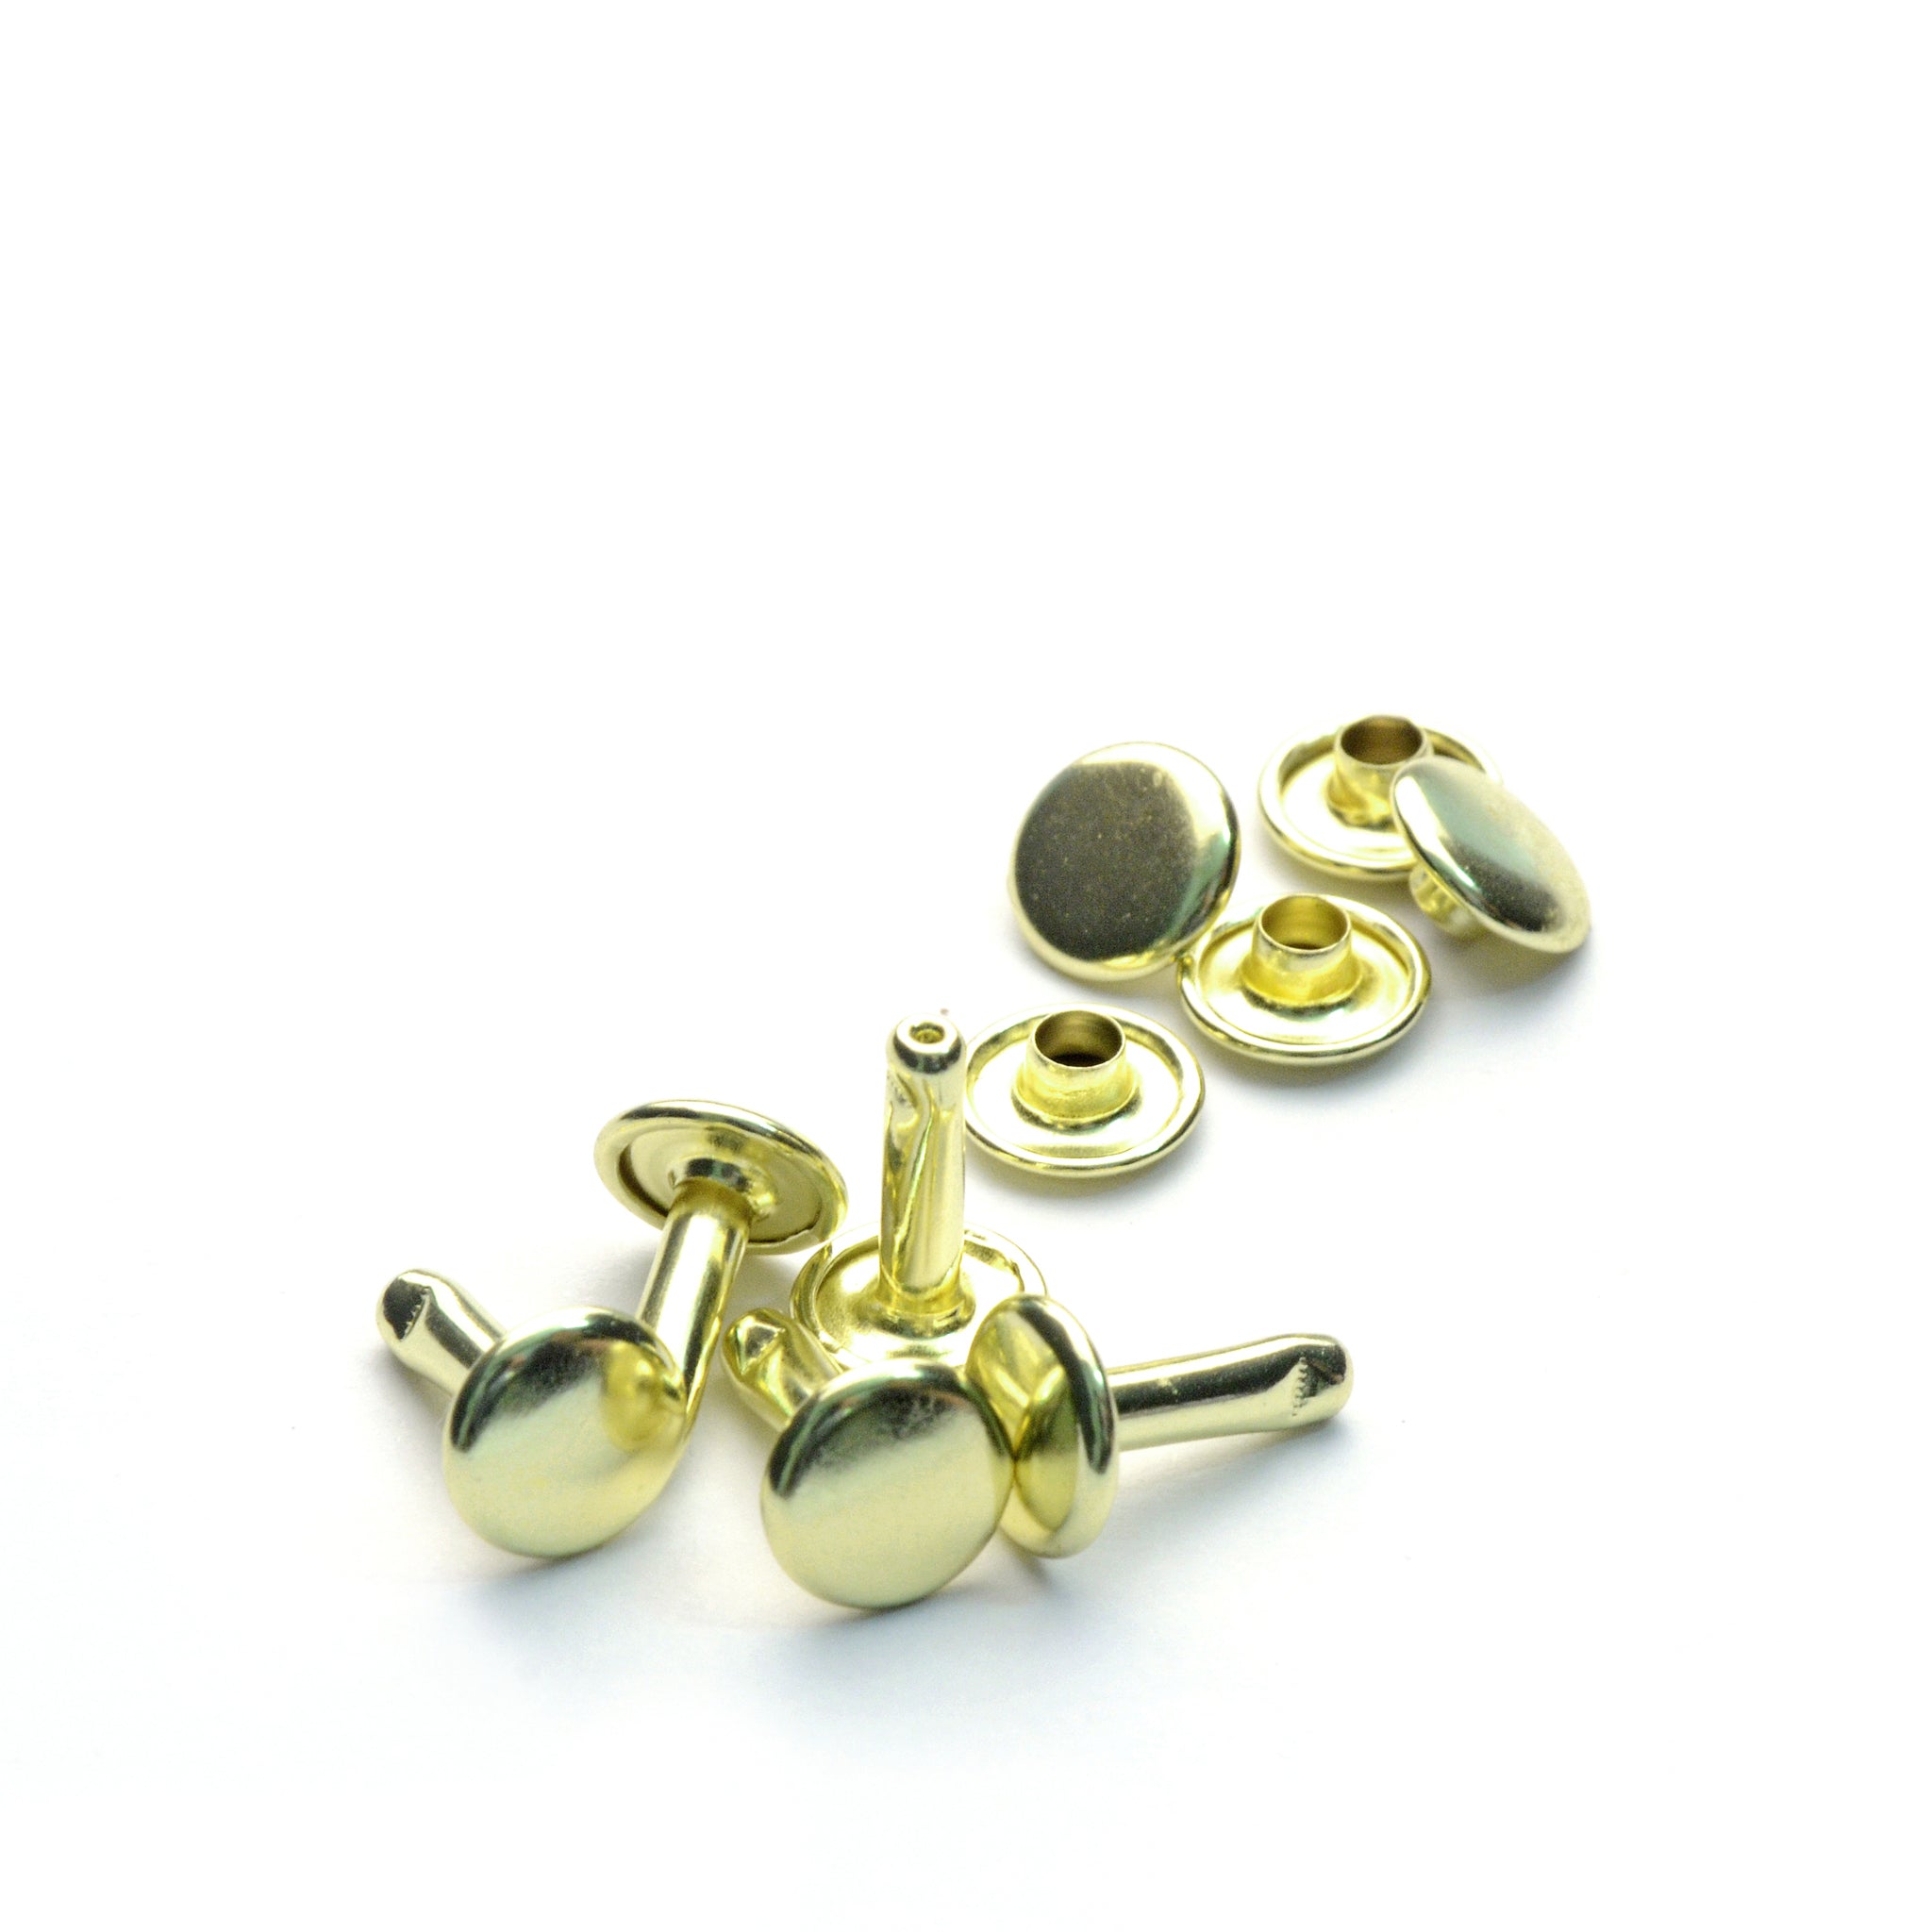 Large Brass Double Cap Rivets from Identity Leathercraft